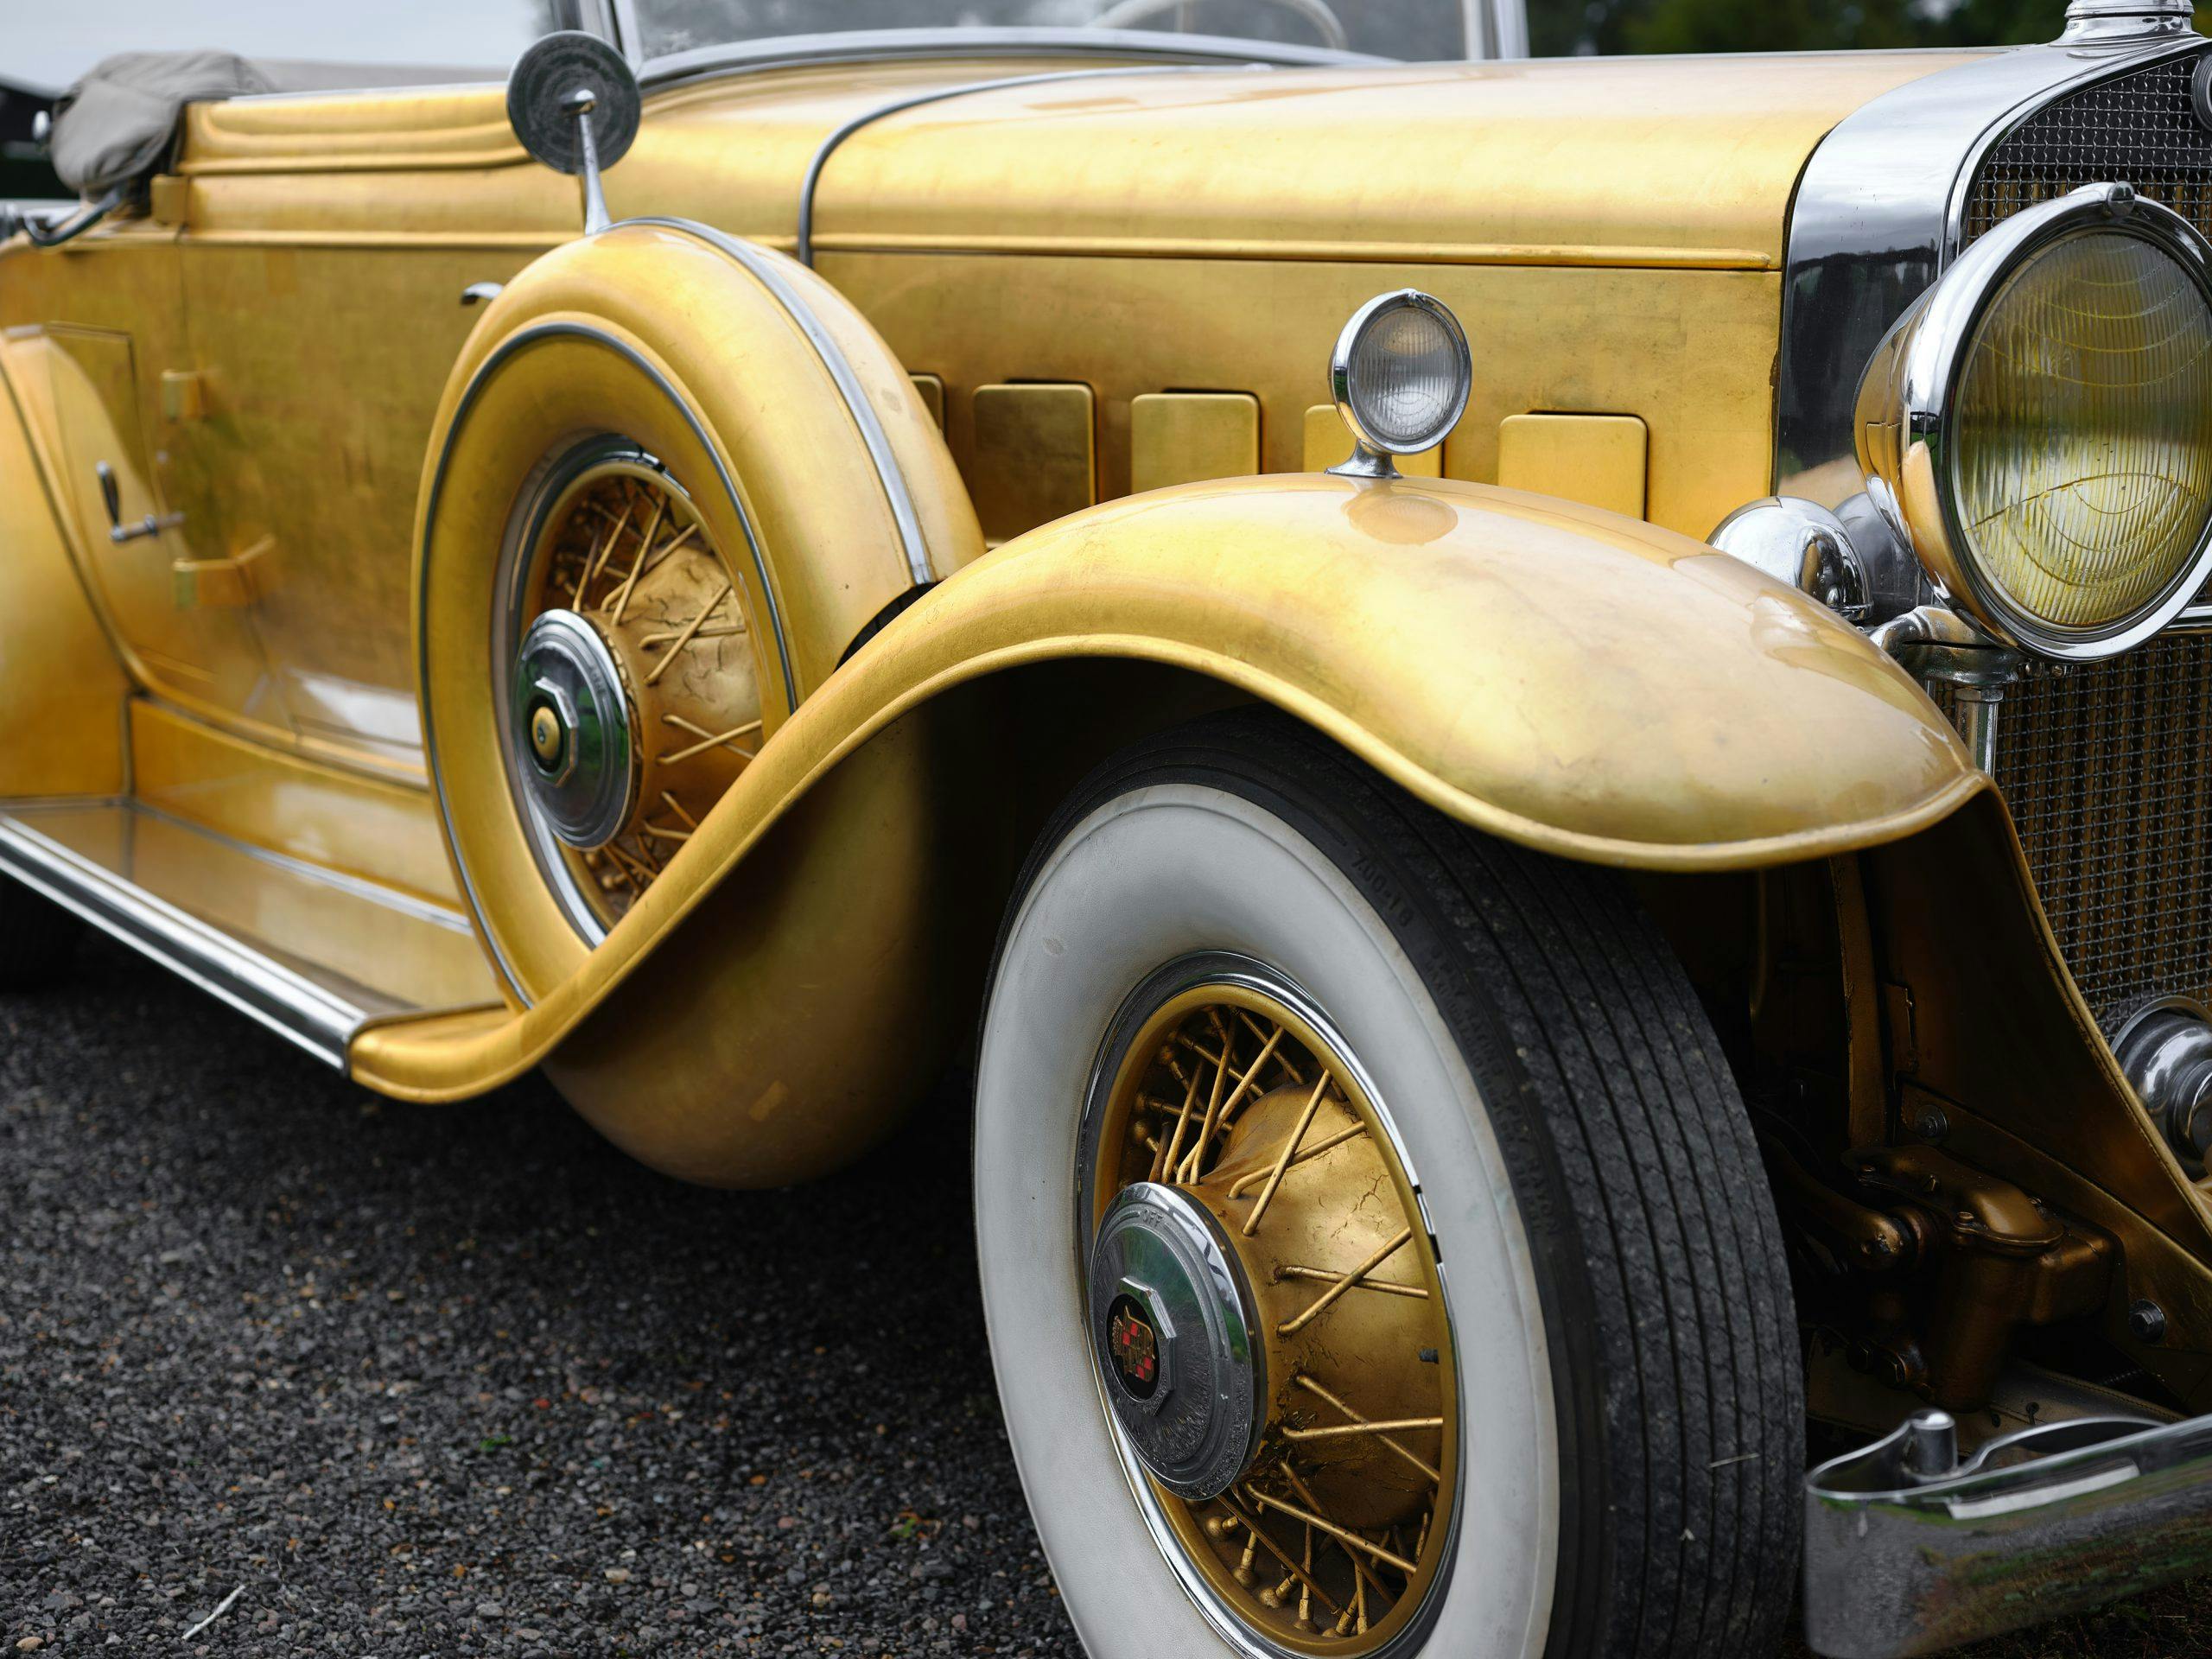 1931 Cadillac V-8 Convertible Coupe front quarter